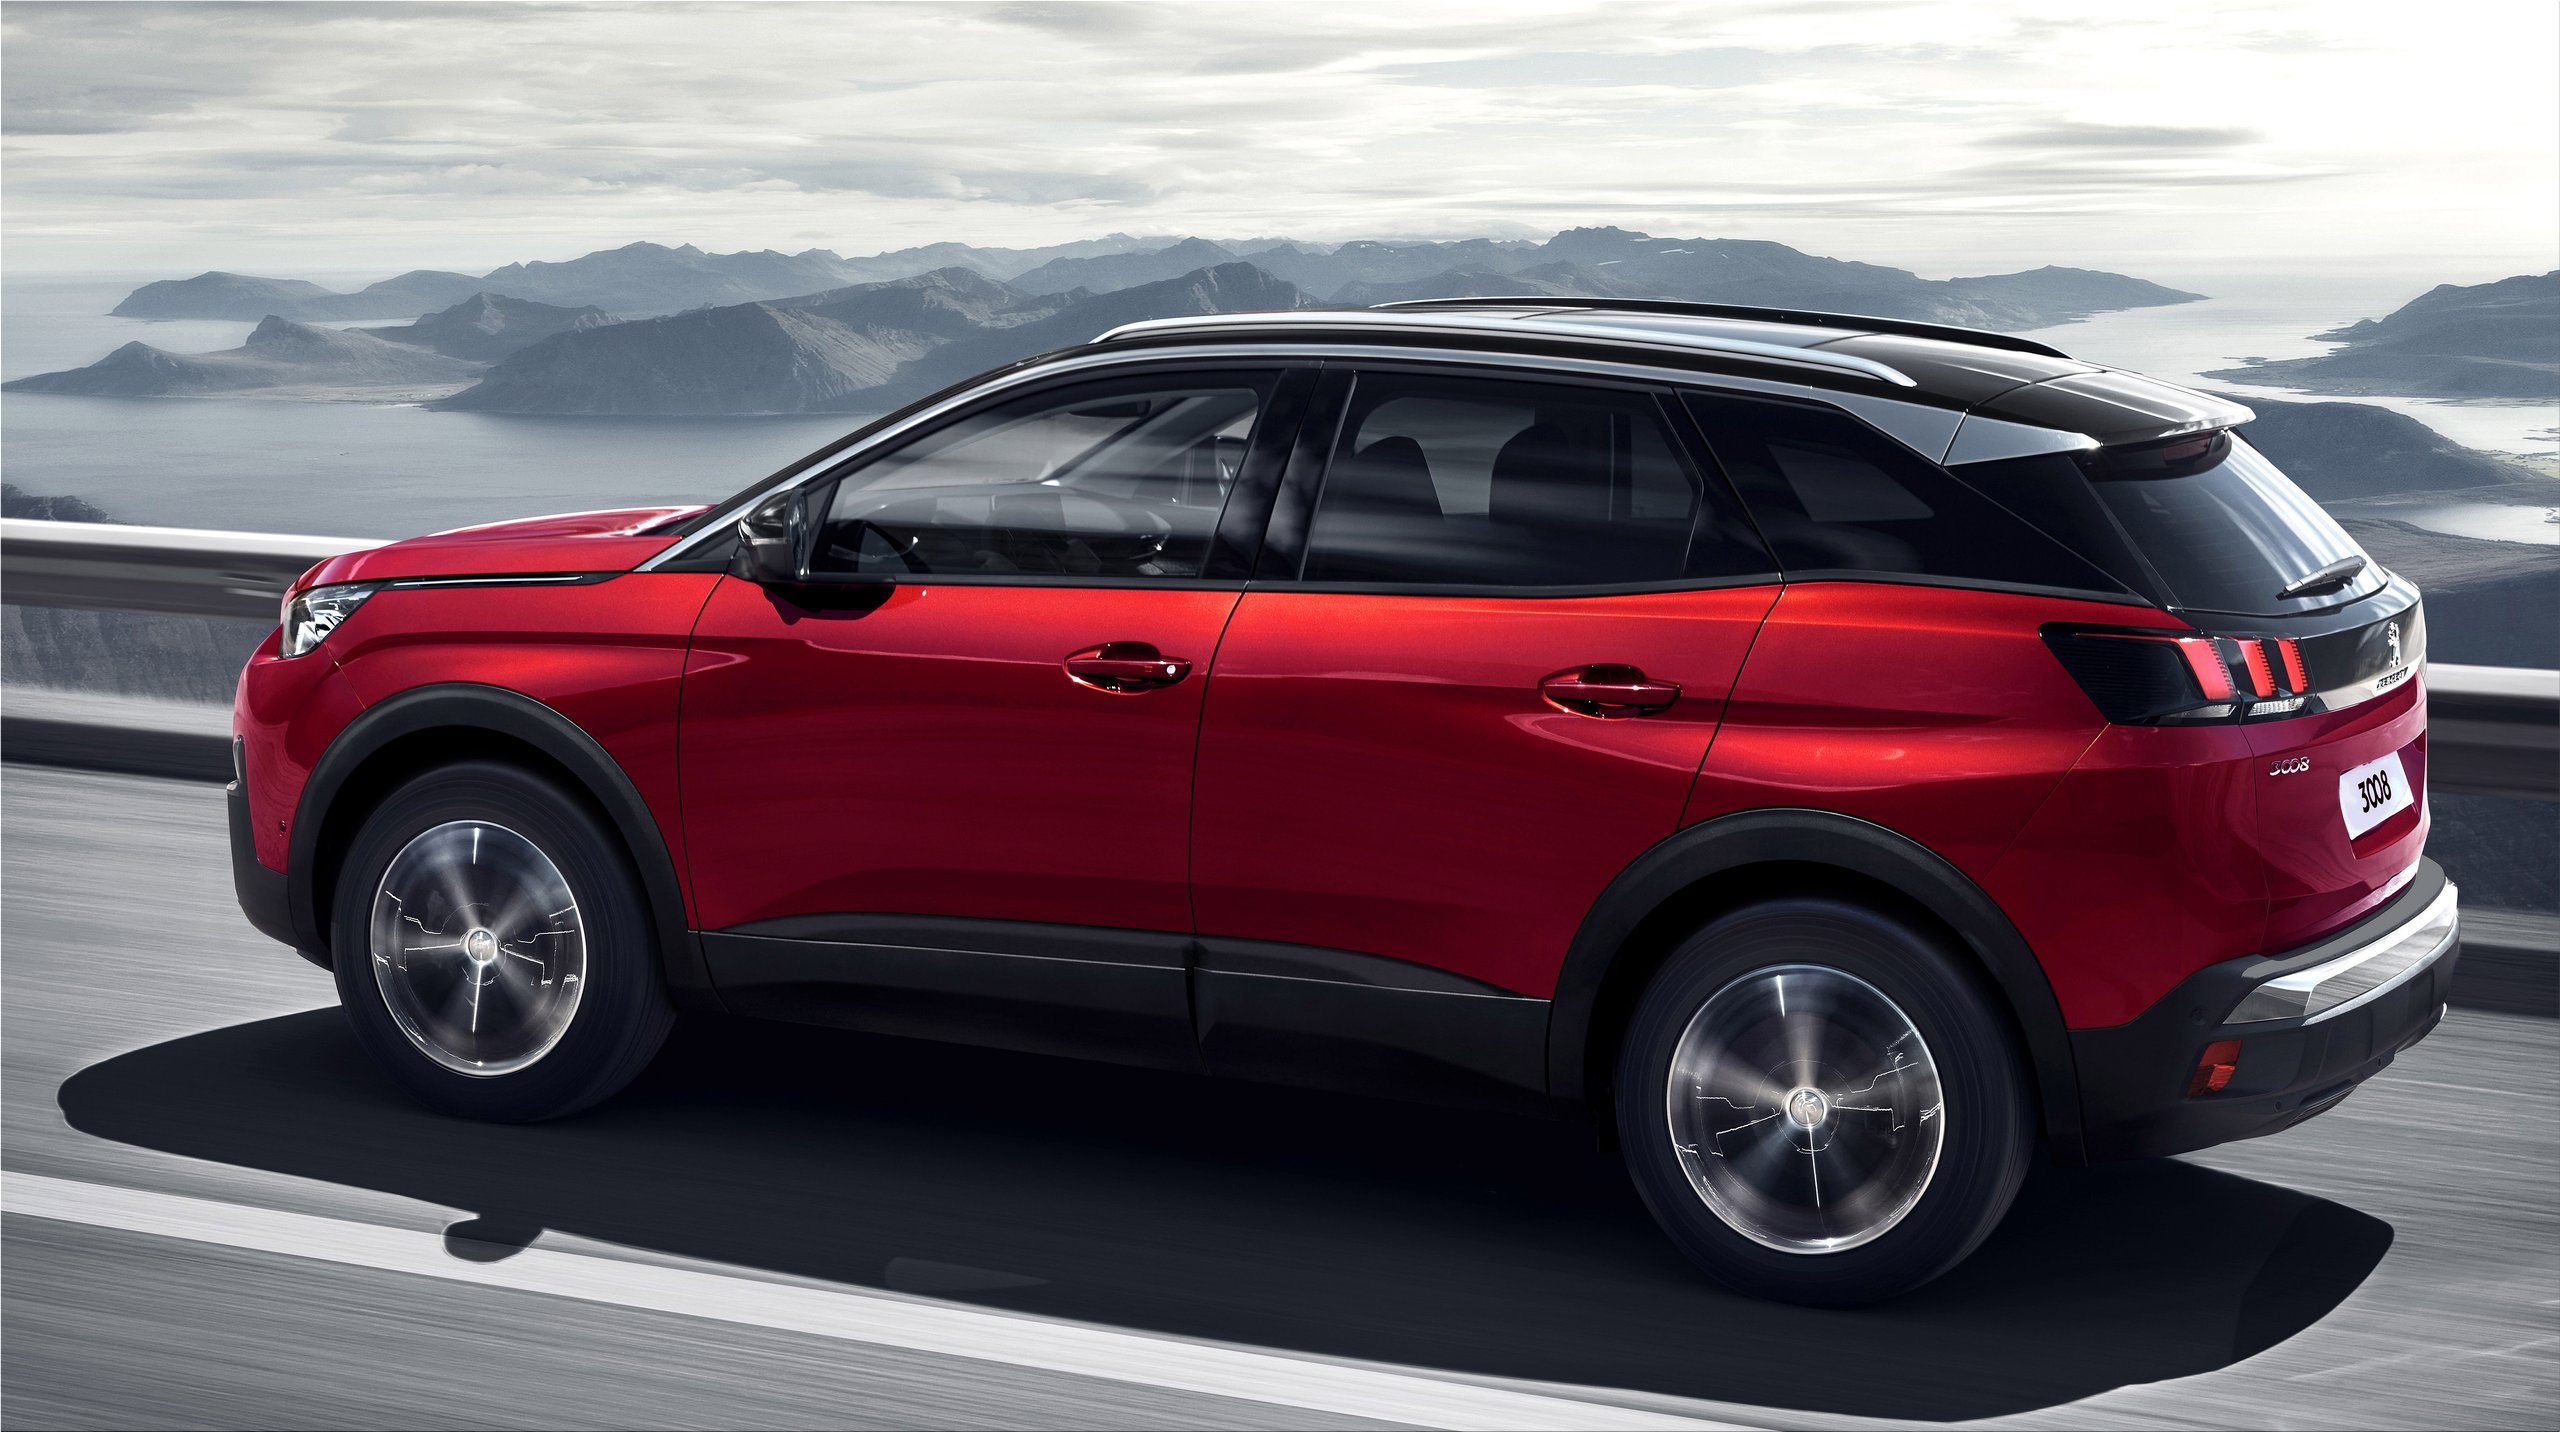 The Peugeot 3008 and 5008 are in high demand Car Division